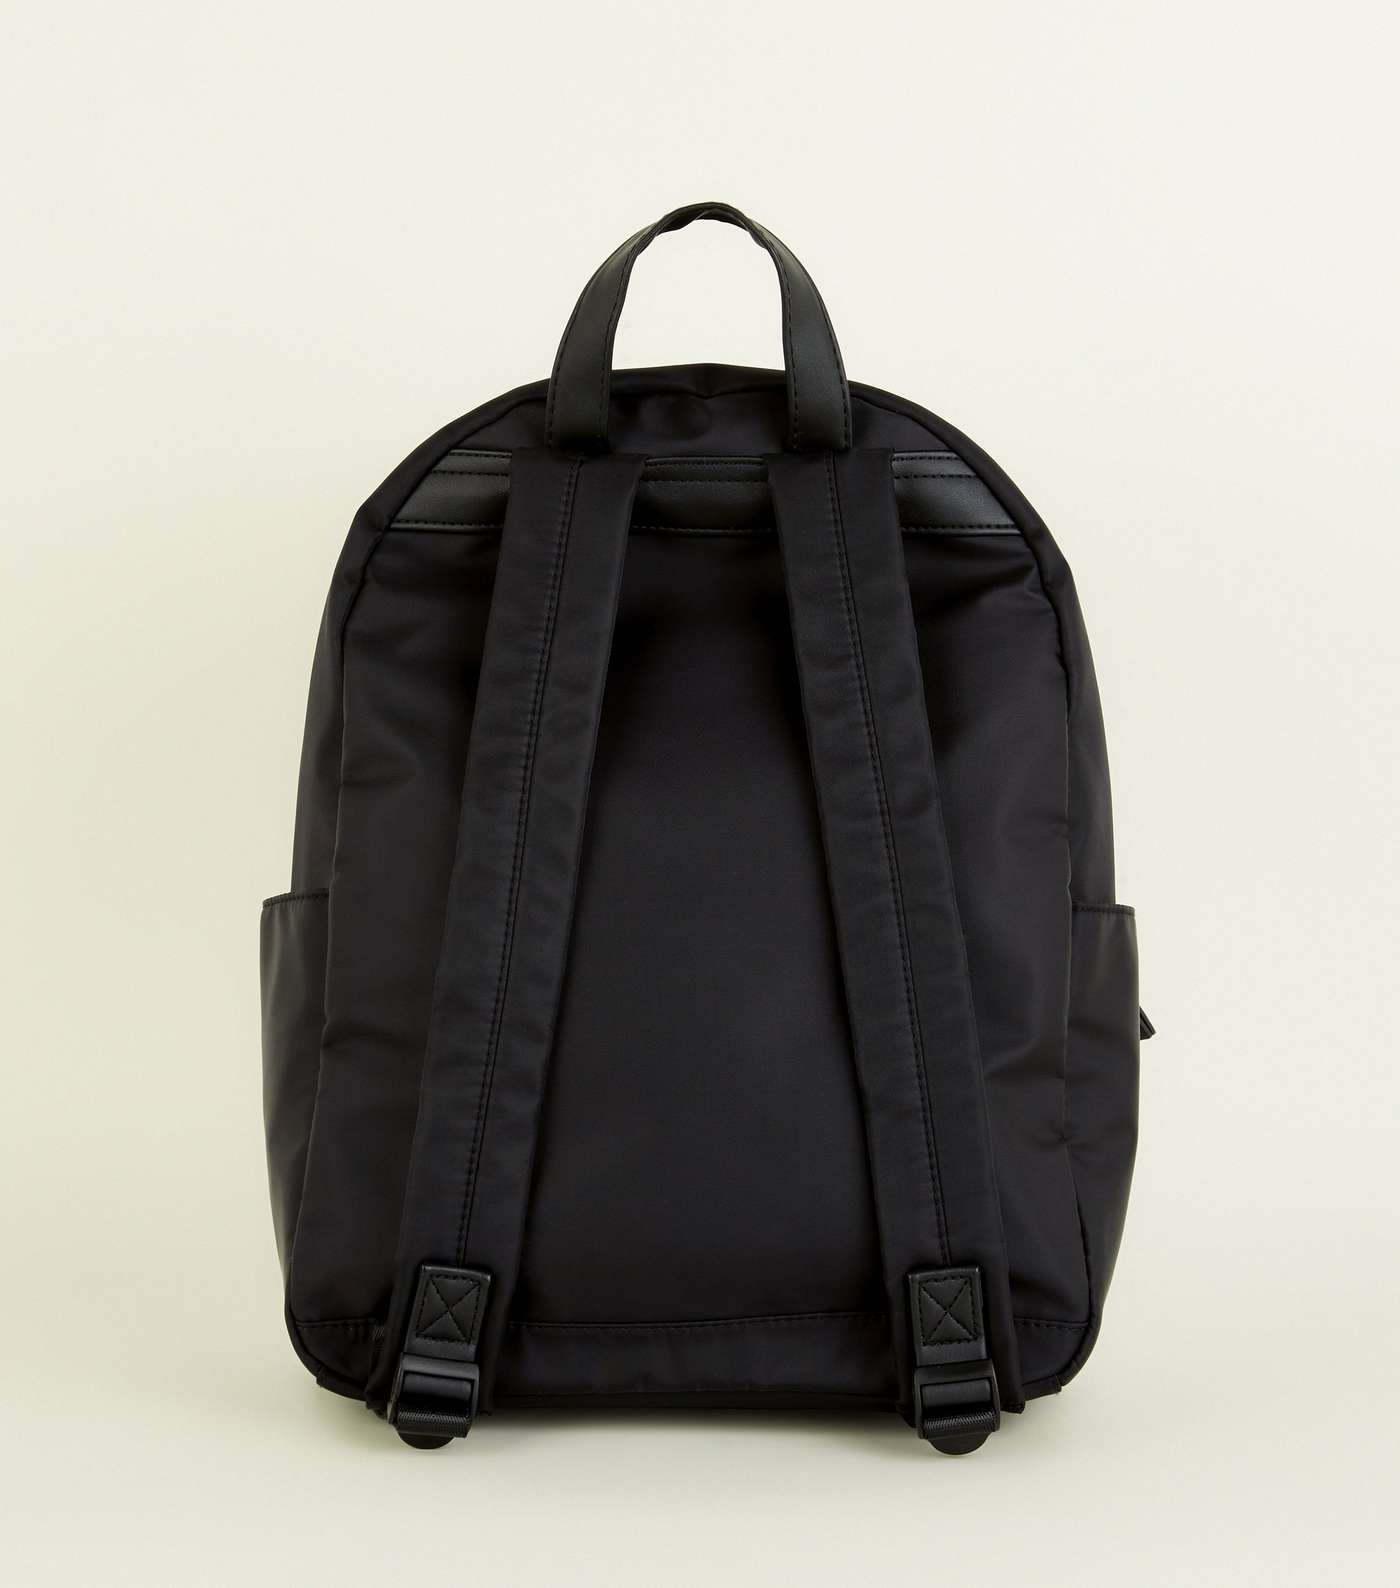 Black Nylon and Leather-Look Backpack Image 6